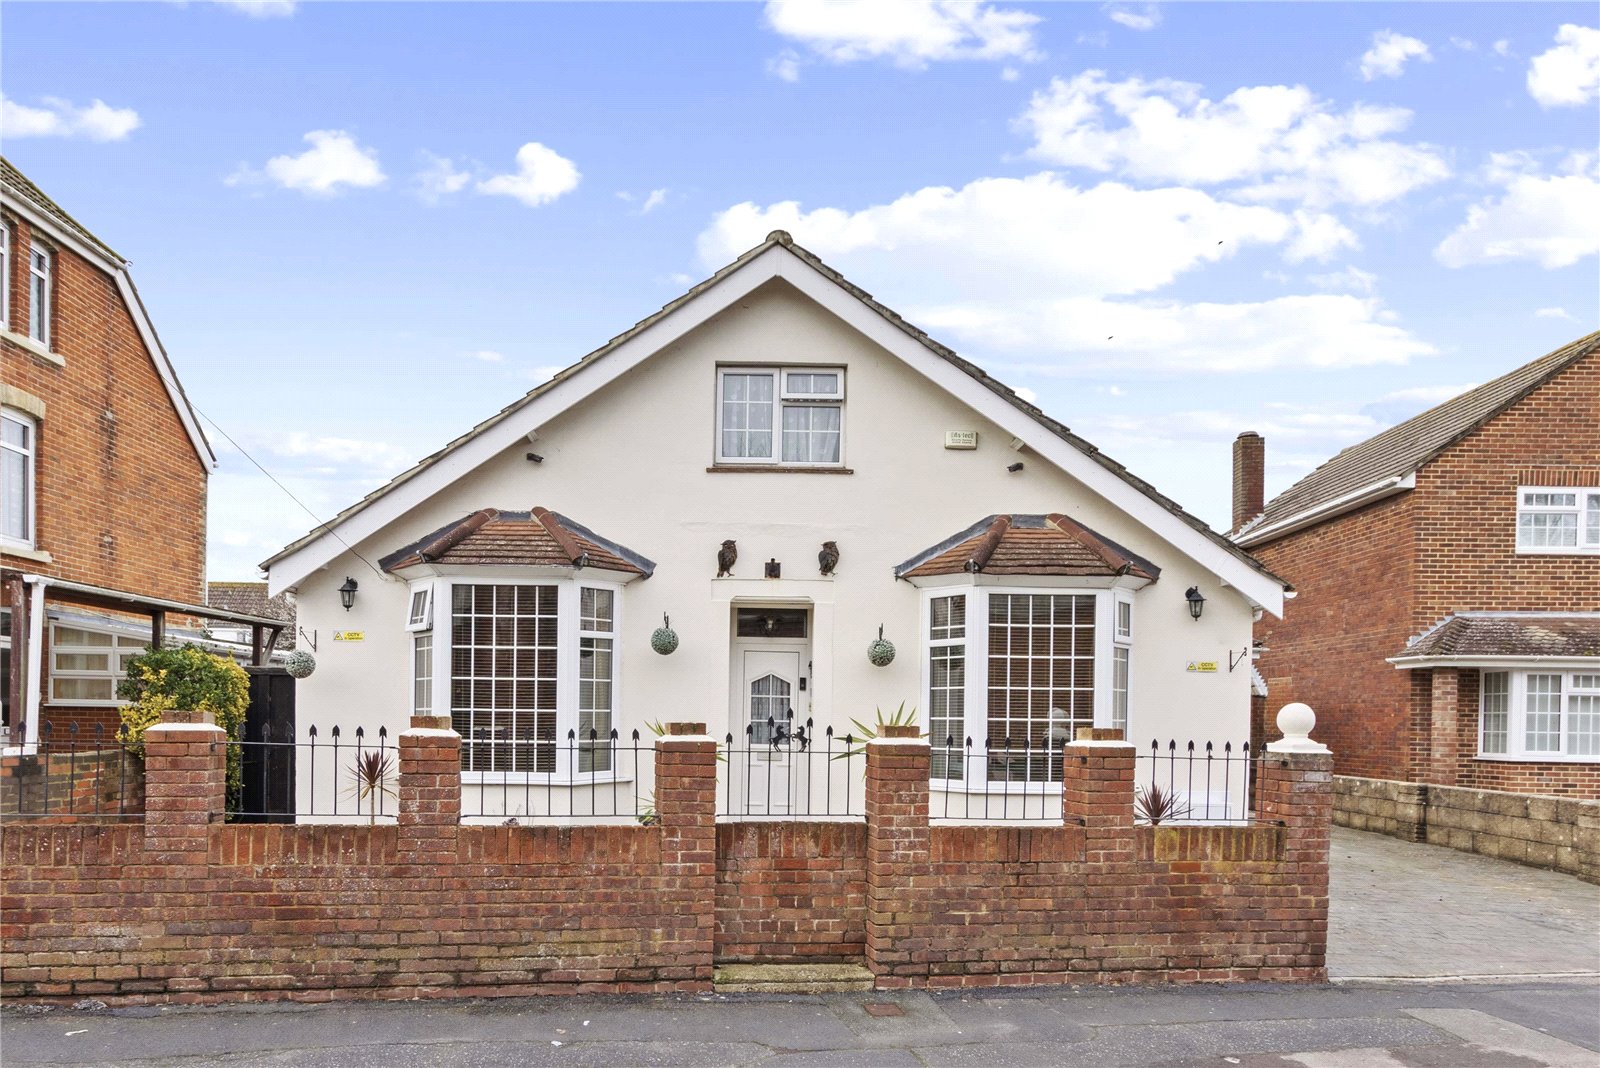 5 bed house for sale in Anns Hill Road, Gosport - Property Image 1